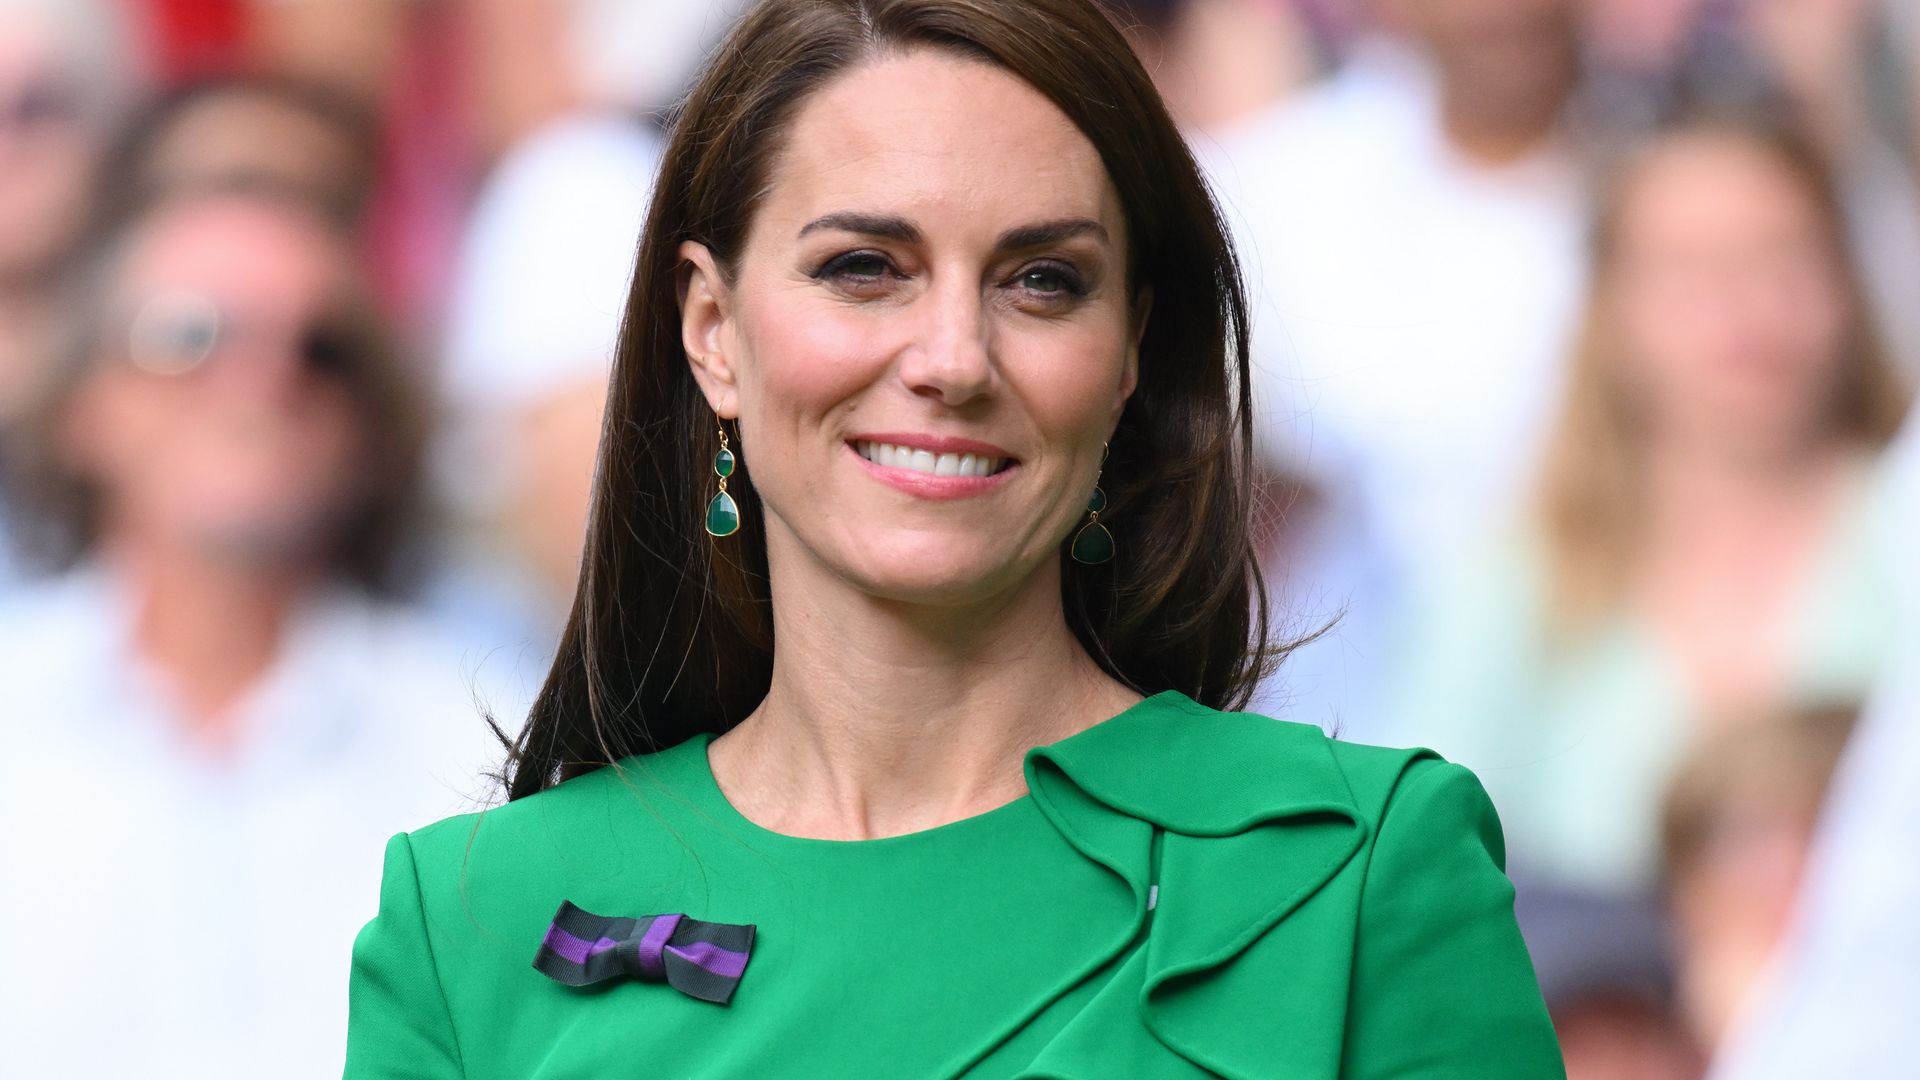 Princess of Wales smiling in green dress with bow pin